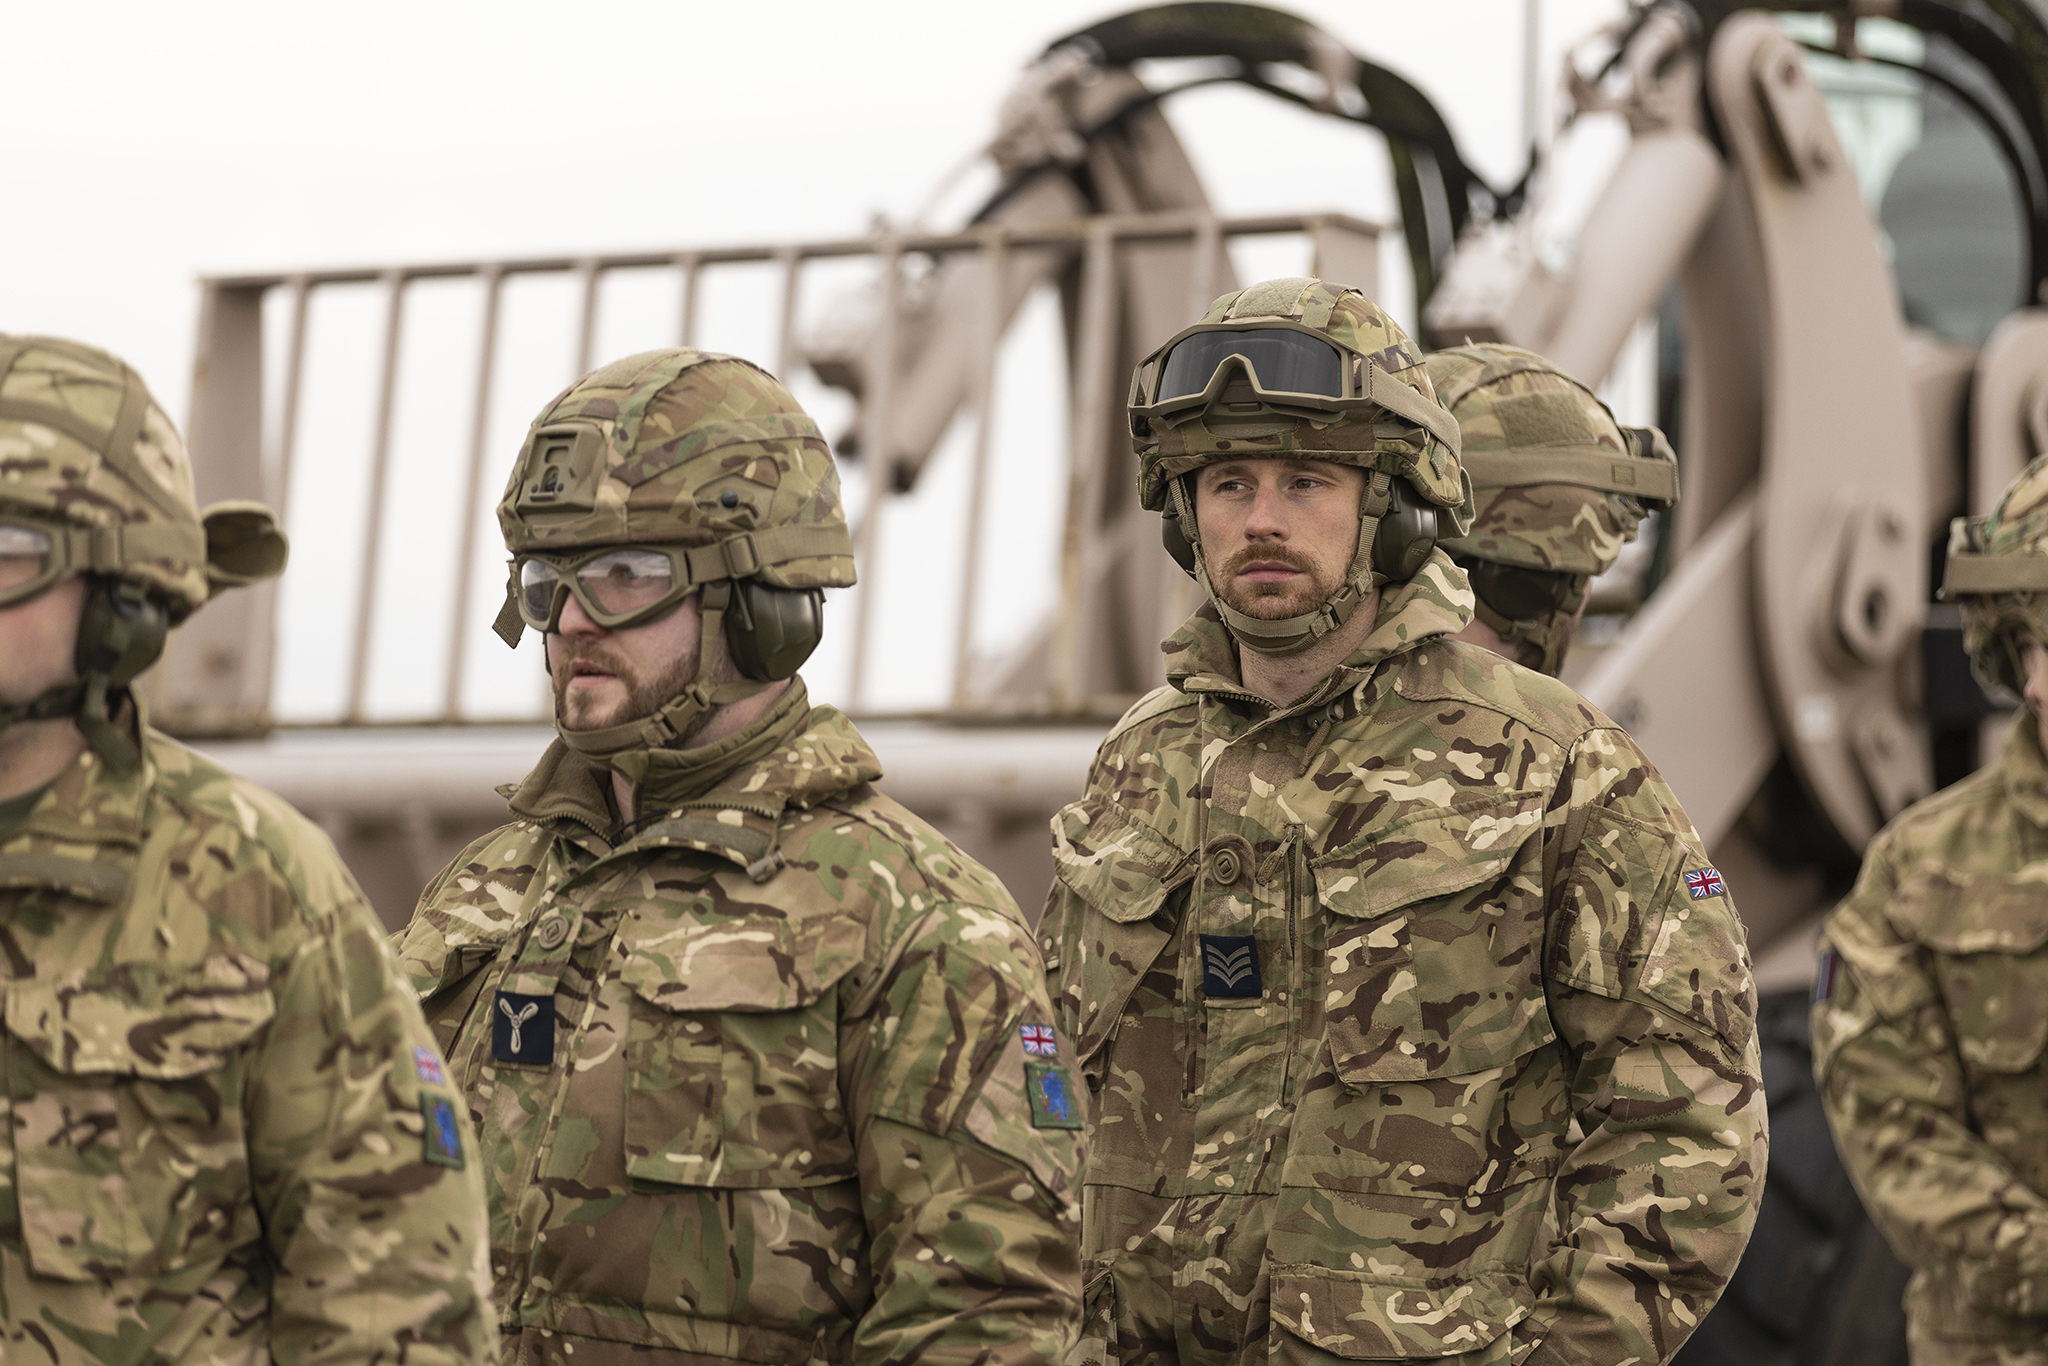 Number 1 Air Mobility Wing (1AMW) based at Royal Air Force Brize Norton have been adding an extra level of realism to their training during Exercise Swift Pirate, which took place at Royal Air Force Wittering.